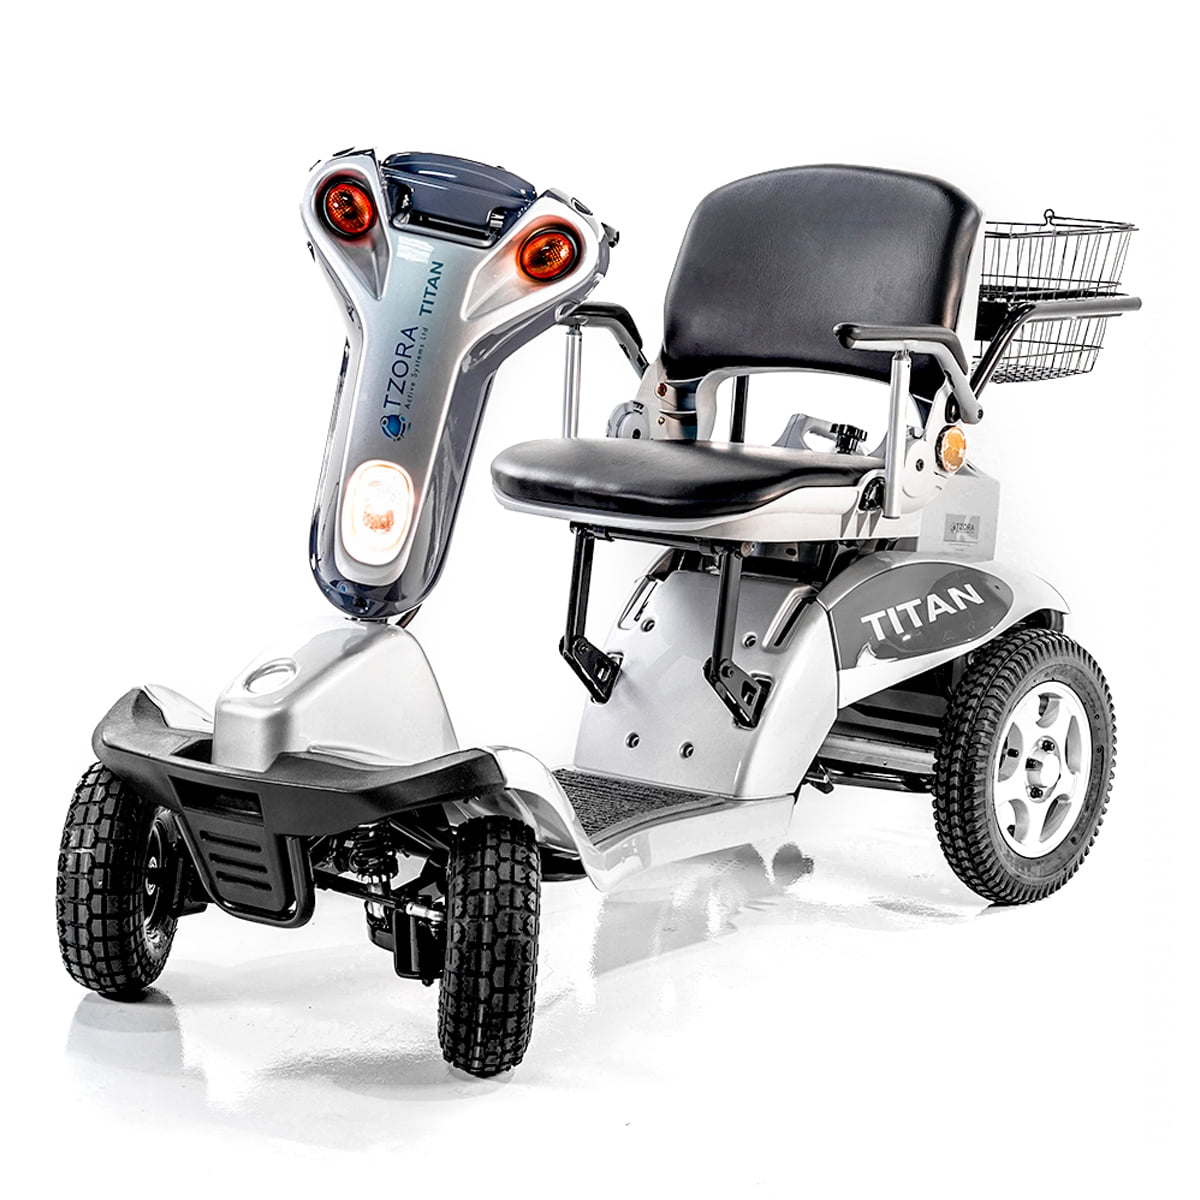 AlveyTech Battery Operated Brake Light & Turn Signal for Mobility Scooters